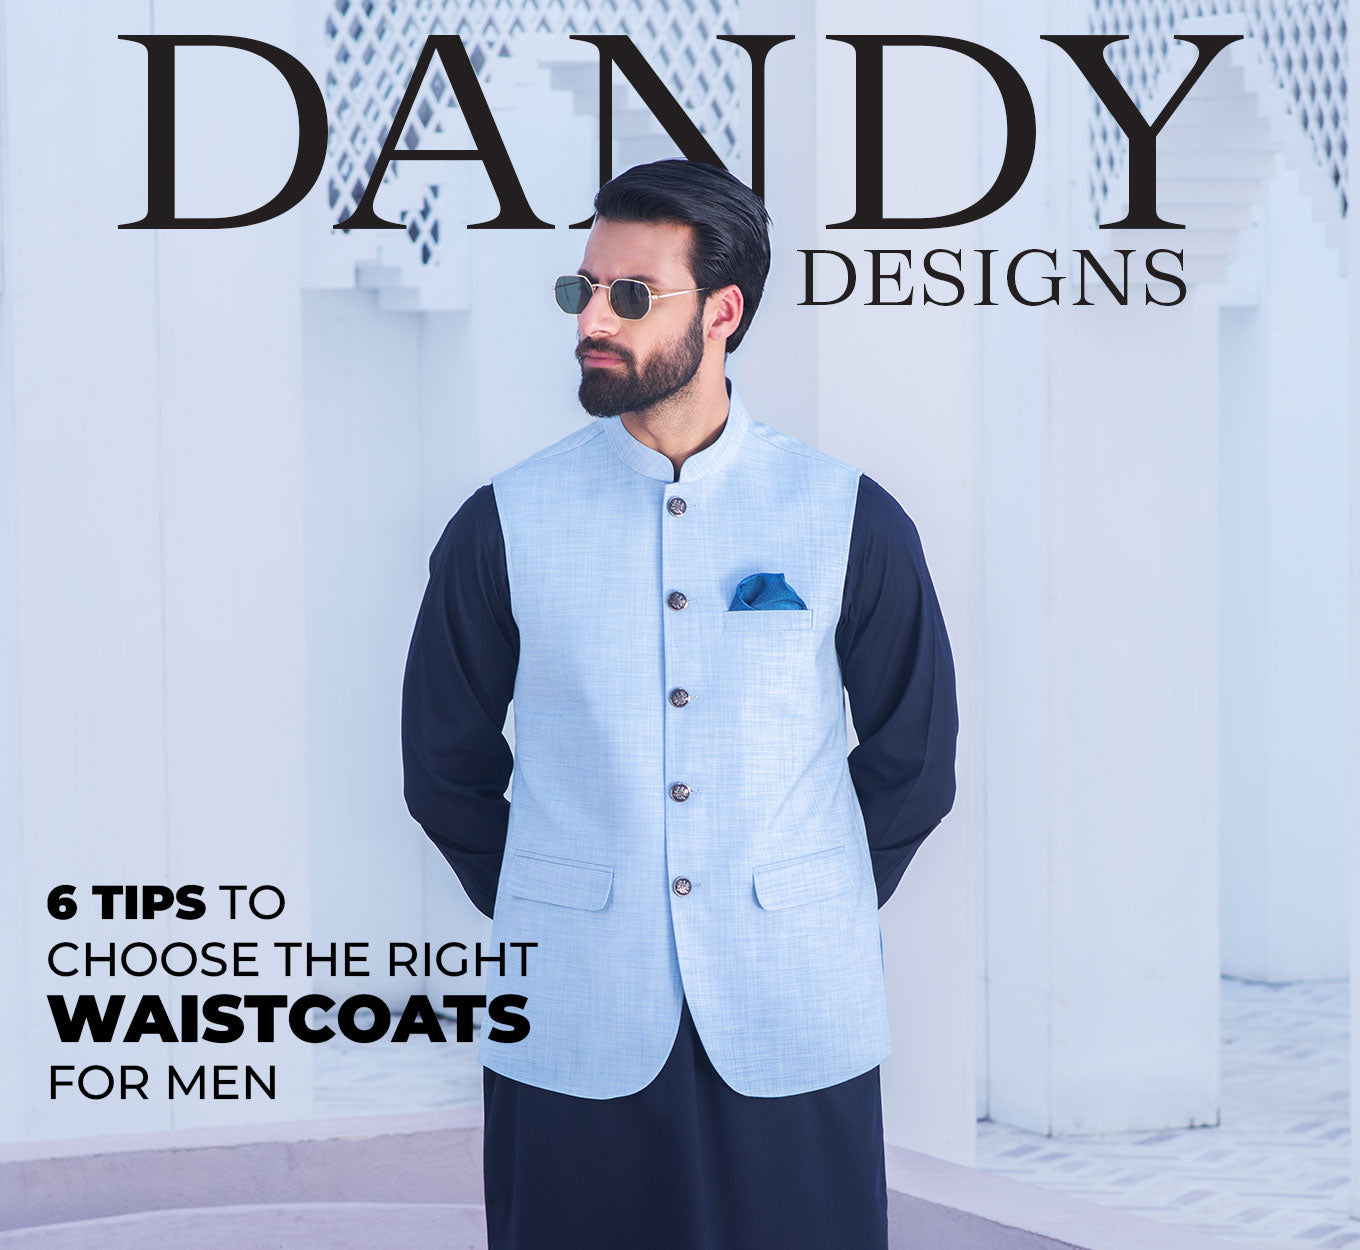 6 Tips to Choose the Right Waistcoats for Men